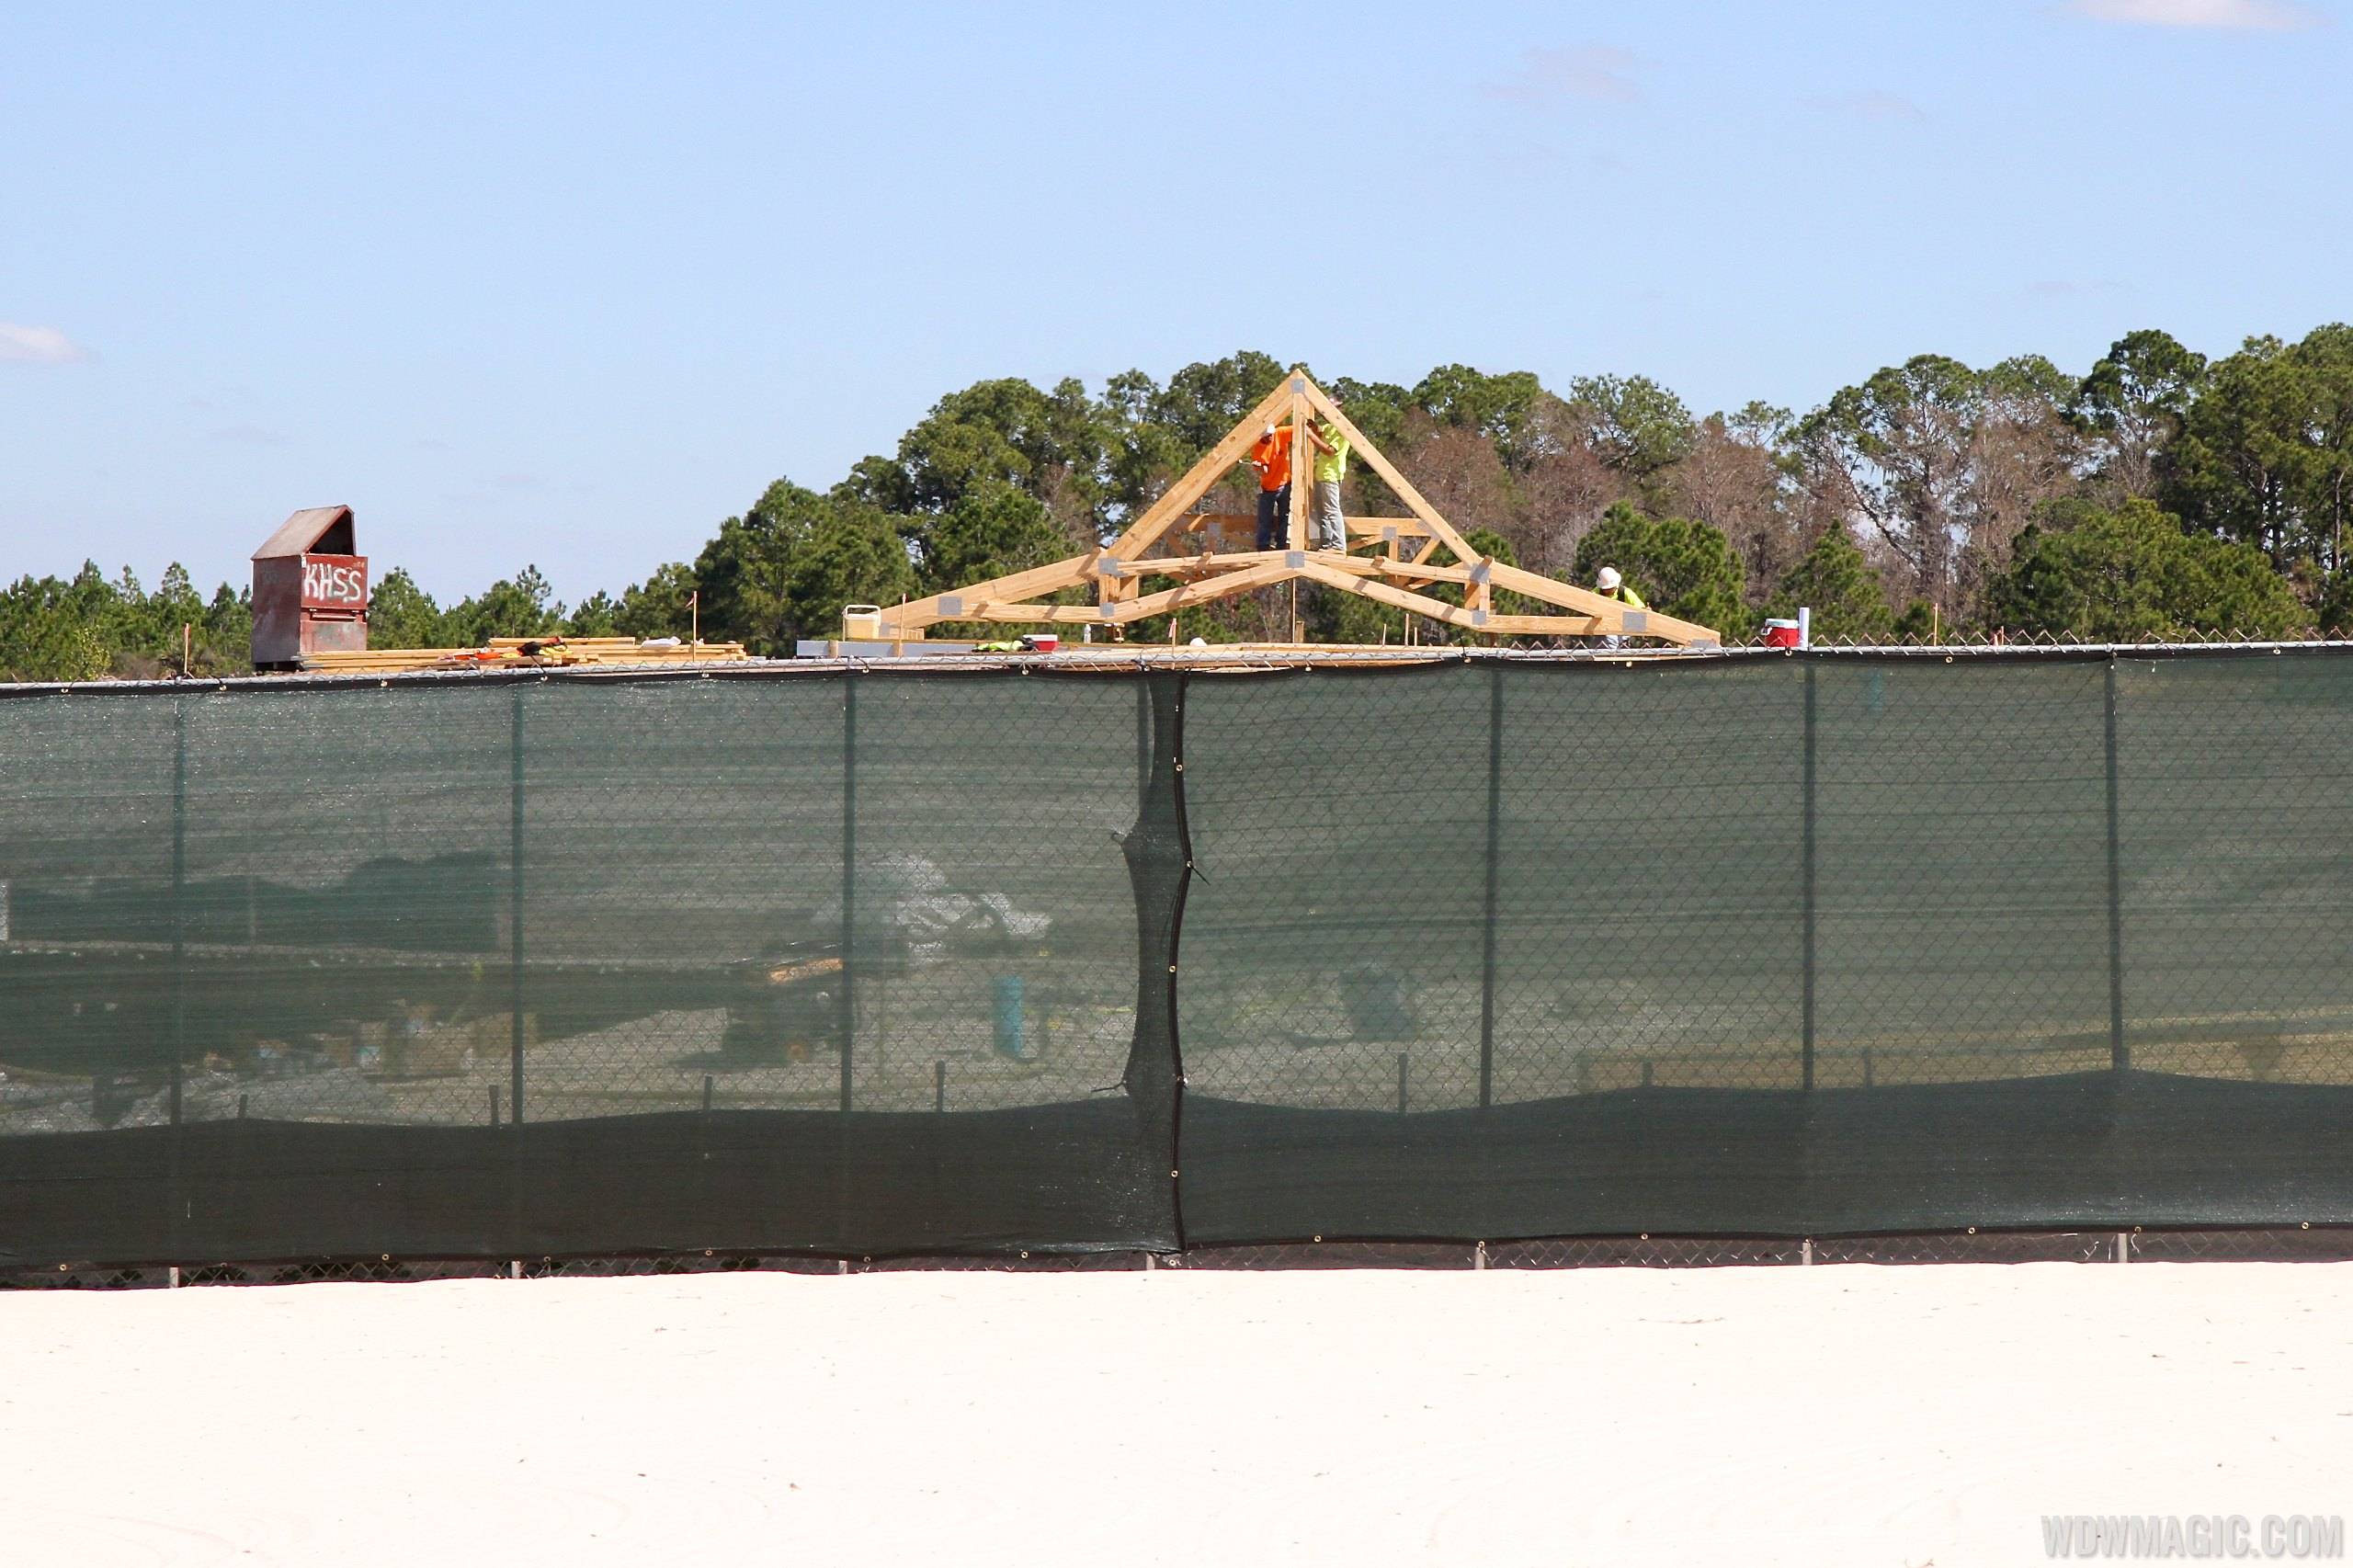 PHOTOS - Rooms now taking shape on the water at the Polynesian Resort Villas